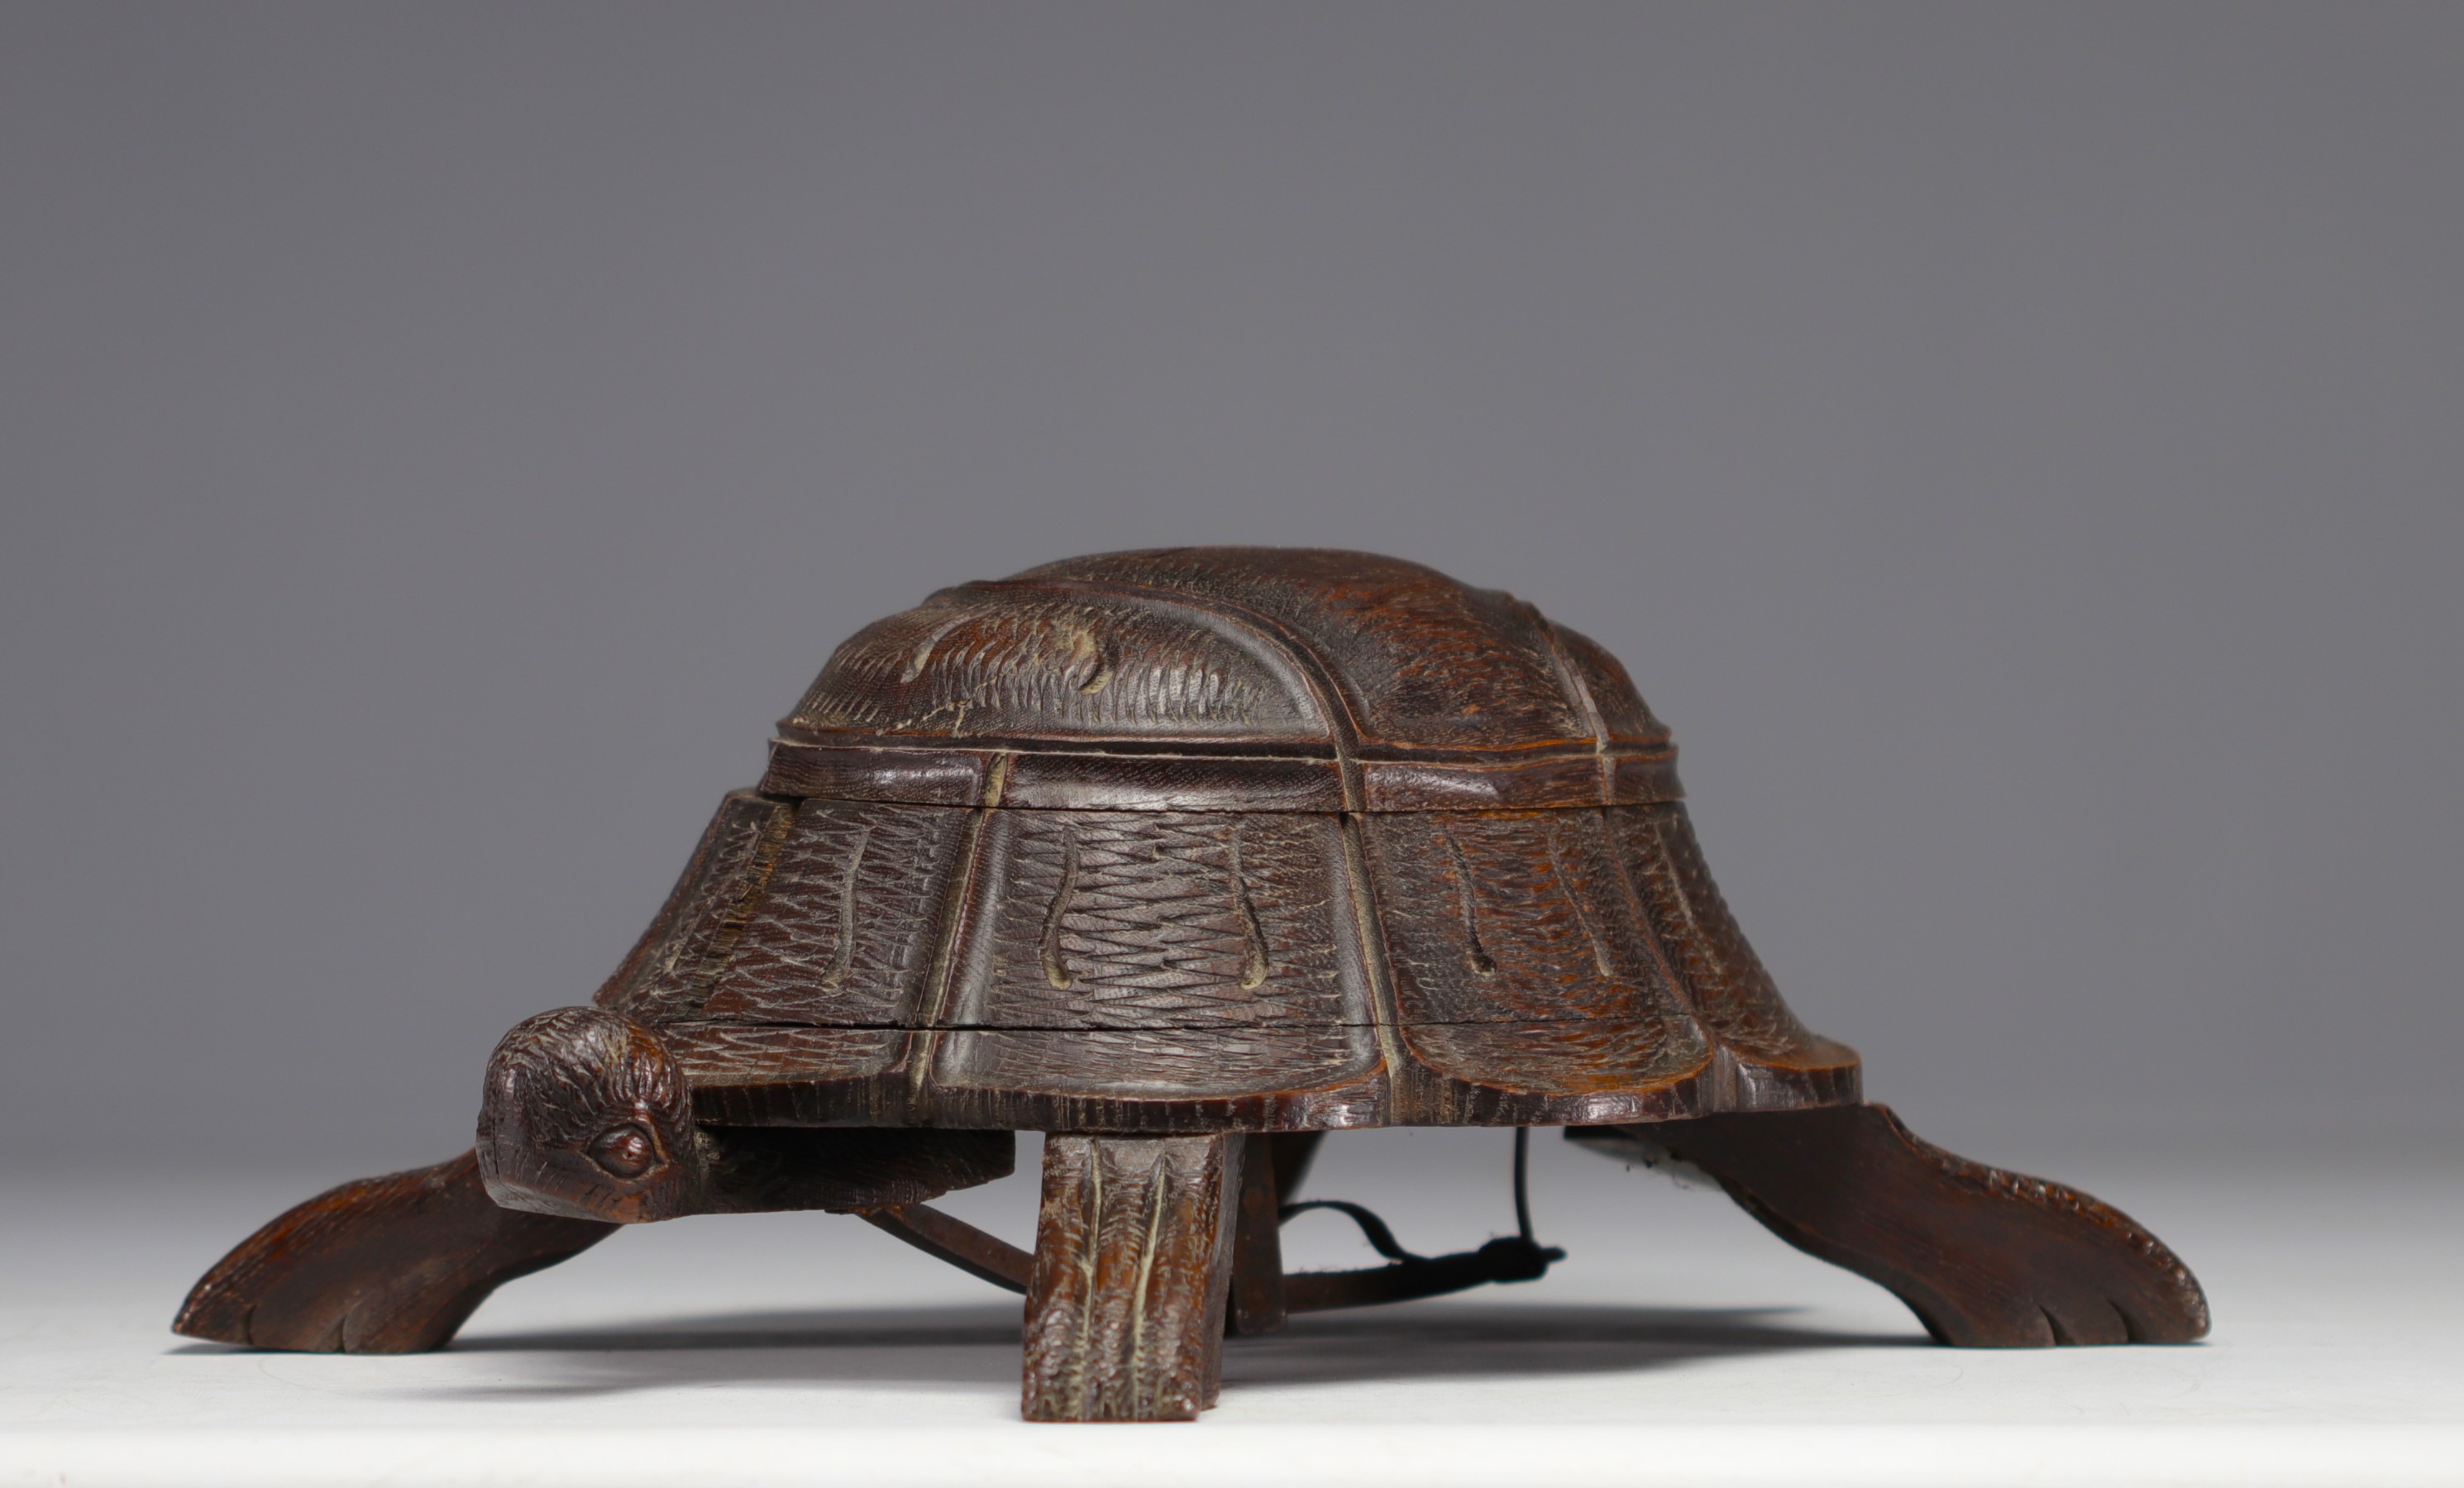 Wooden billiard spittoon in the shape of a turtle, late 19th century. - Image 2 of 5